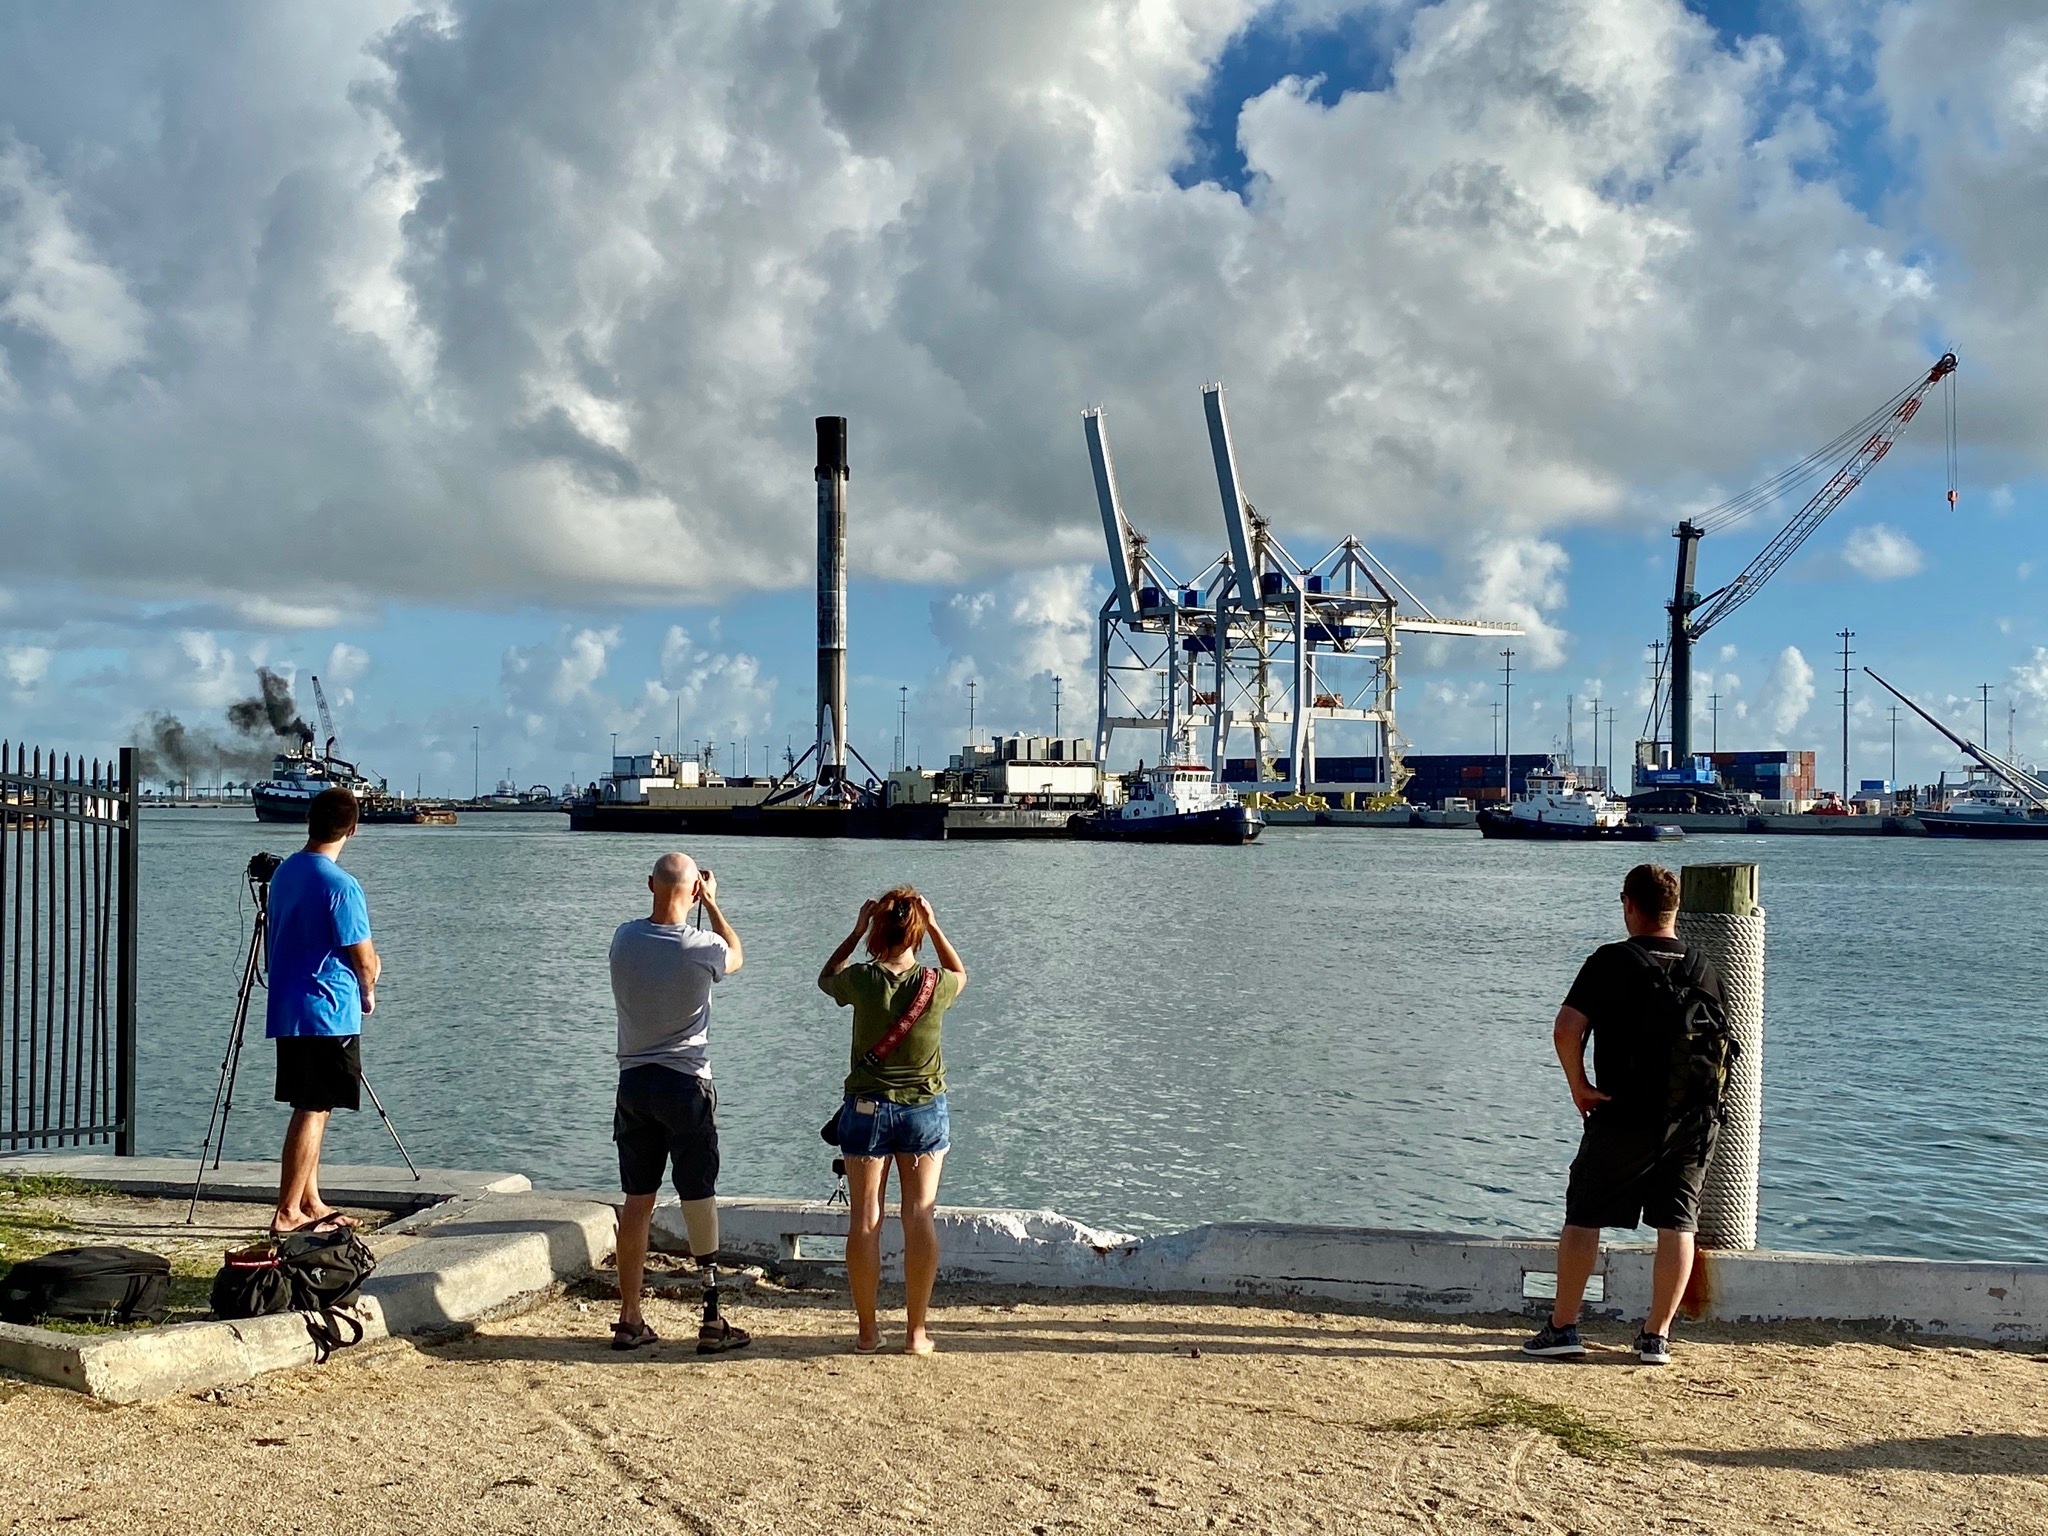 Photos of the arrival of the JRTI platform with the first stage of B1058.2 at Port Canaveral - Spacex, Falcon 9, Cape Canaveral, Cosmonautics, Step, Space, Video, Longpost